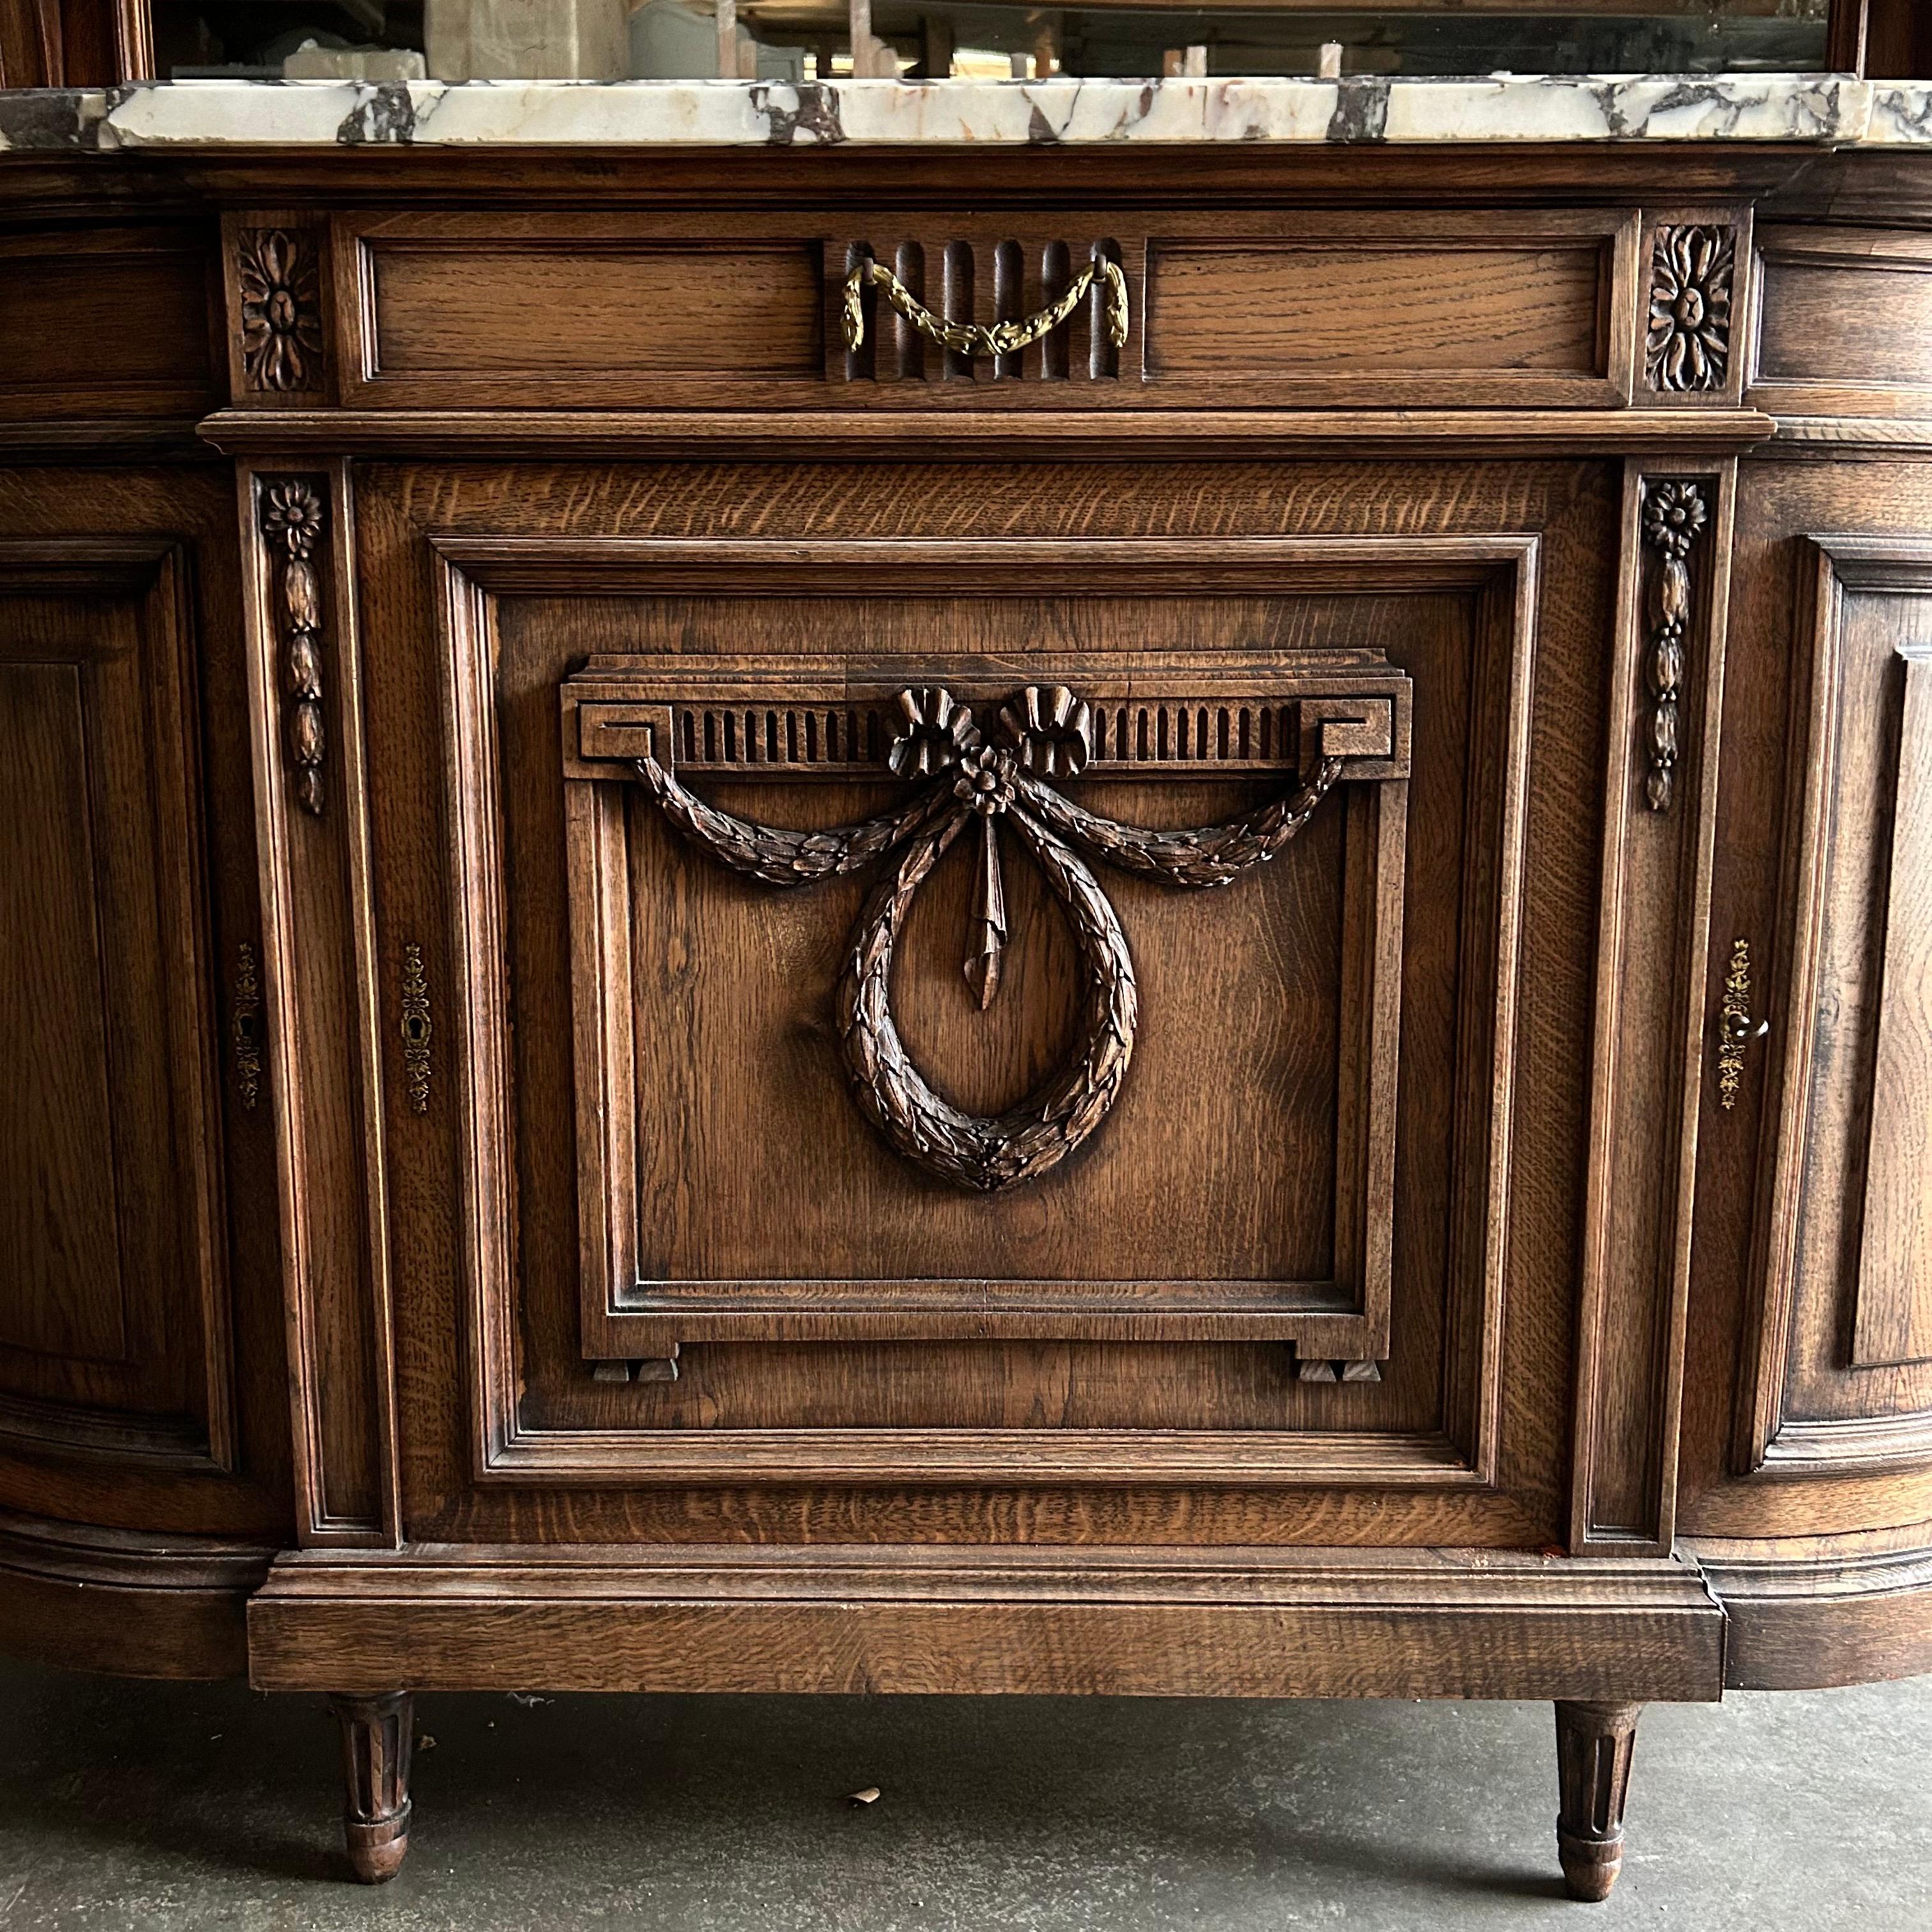 Beautiful wood carved ribbon Antique Breccia marble top Oak hunters cabinet. Great for displaying fine china and collectables, Hunters cabinet 66”w x 24”d x 83”h
Countertop: 40”h
Inside top shelf: 12”d
Bottom inside shelf: 19”d